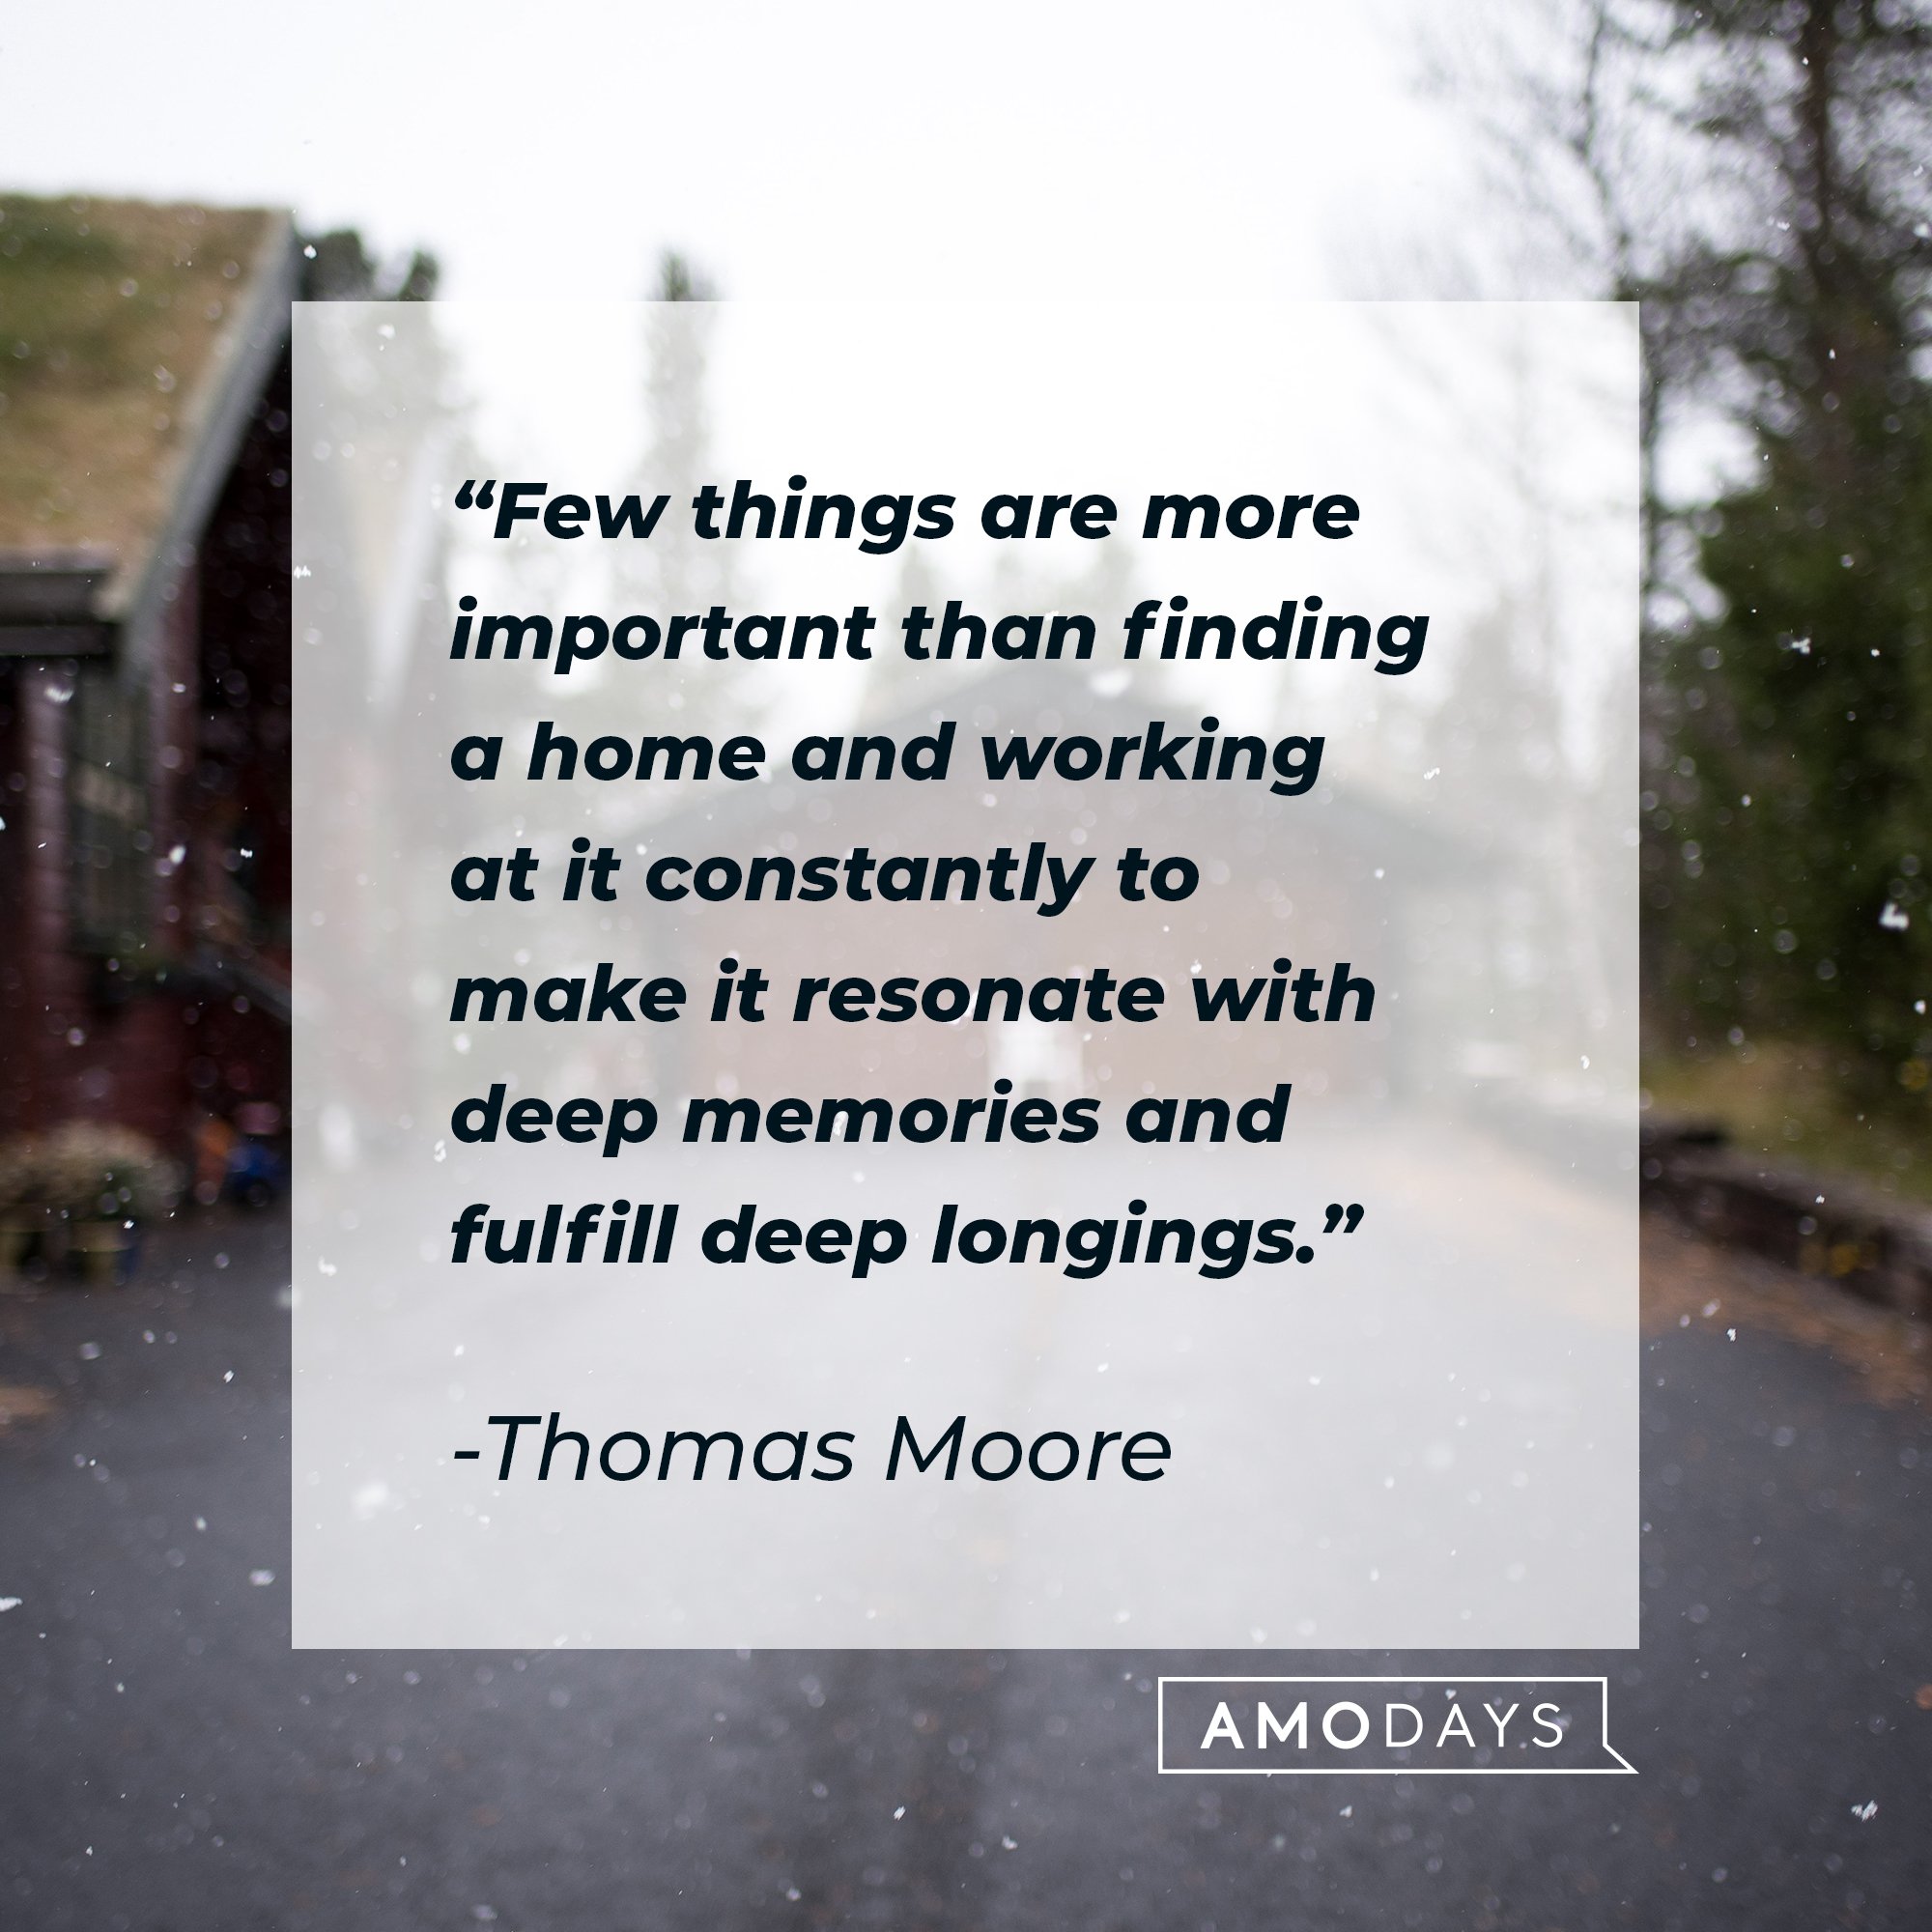 Thomas Moore's quote: "Few things are more important than finding a home and working at it constantly to make it resonate with deep memories and fulfill deep longings." | Image: AmoDays